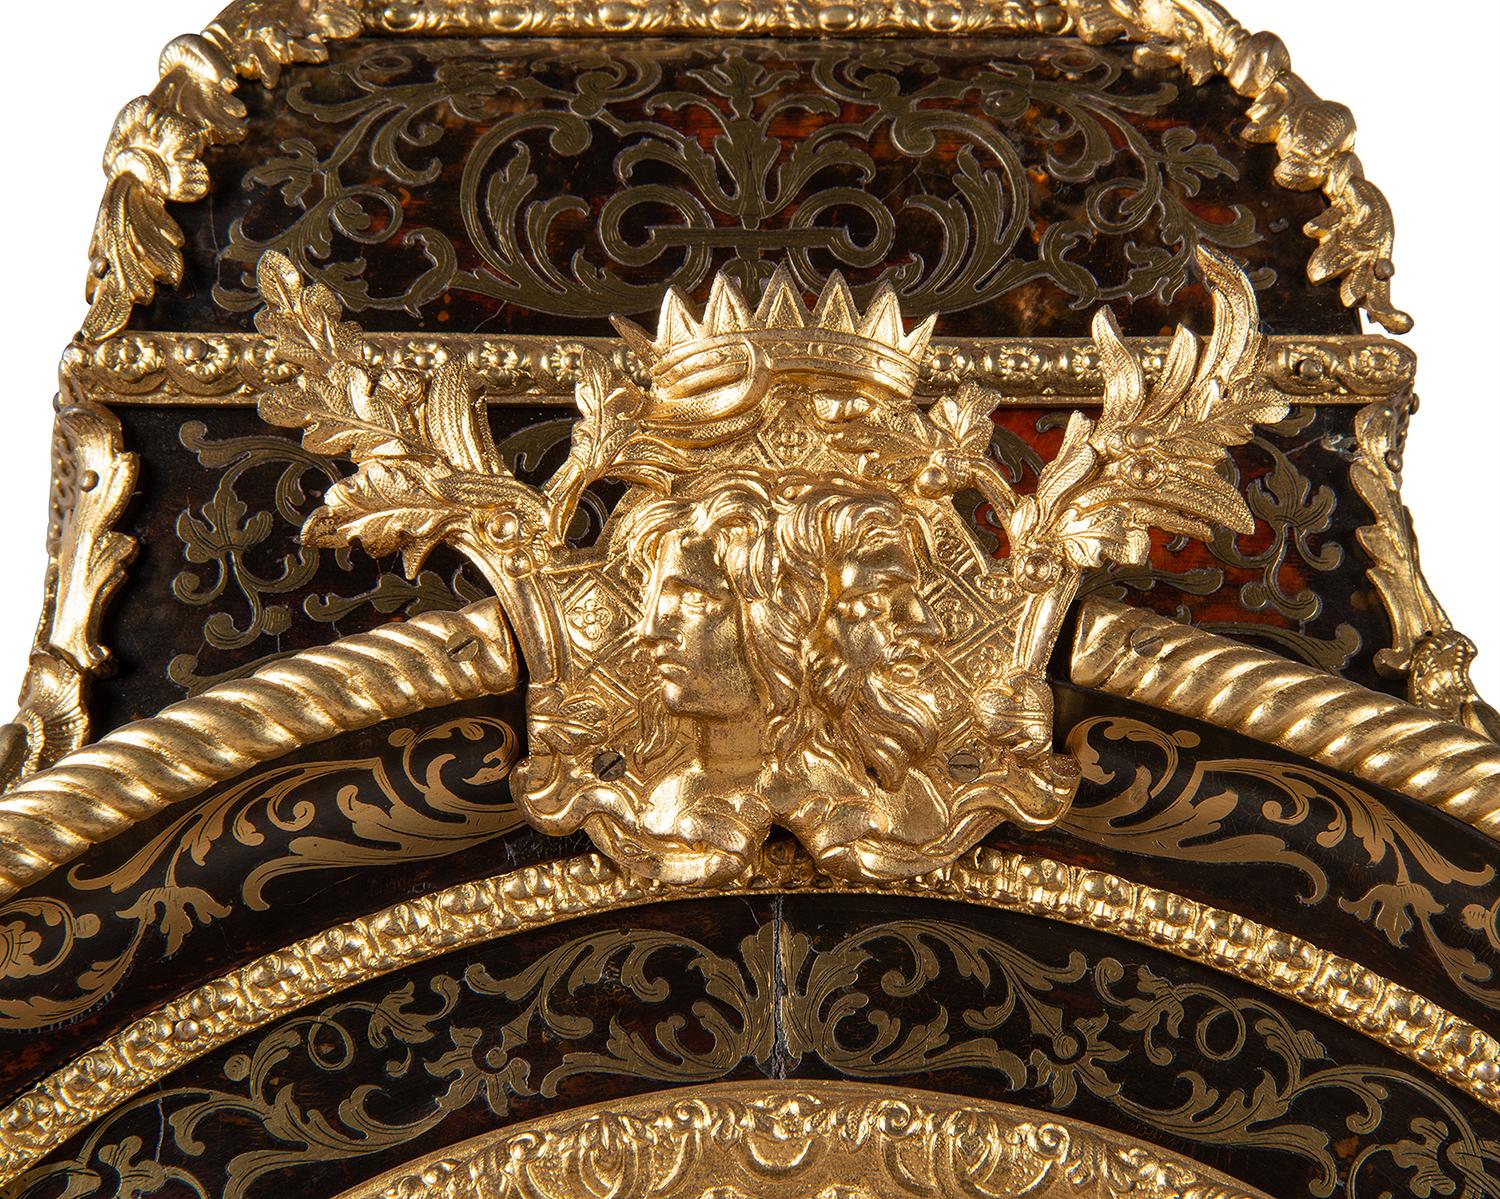 19th Century French Boulle Mantel Clock In Good Condition For Sale In Brighton, Sussex